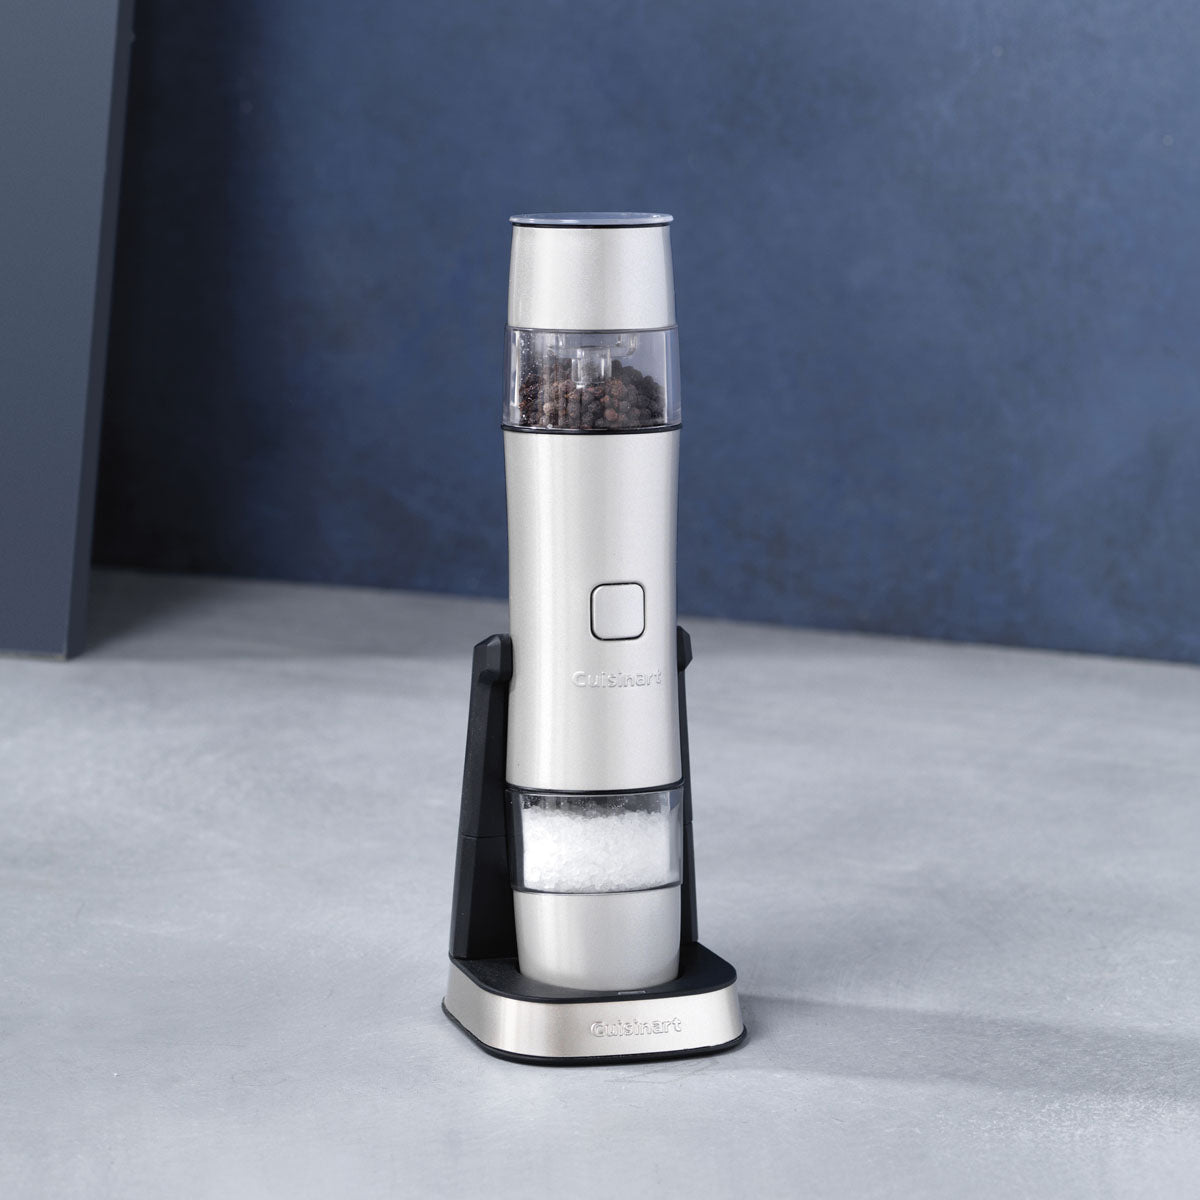 Cuisinart SG-3 Rechargeable Salt, Pepper and Spice Mill Mini Prep